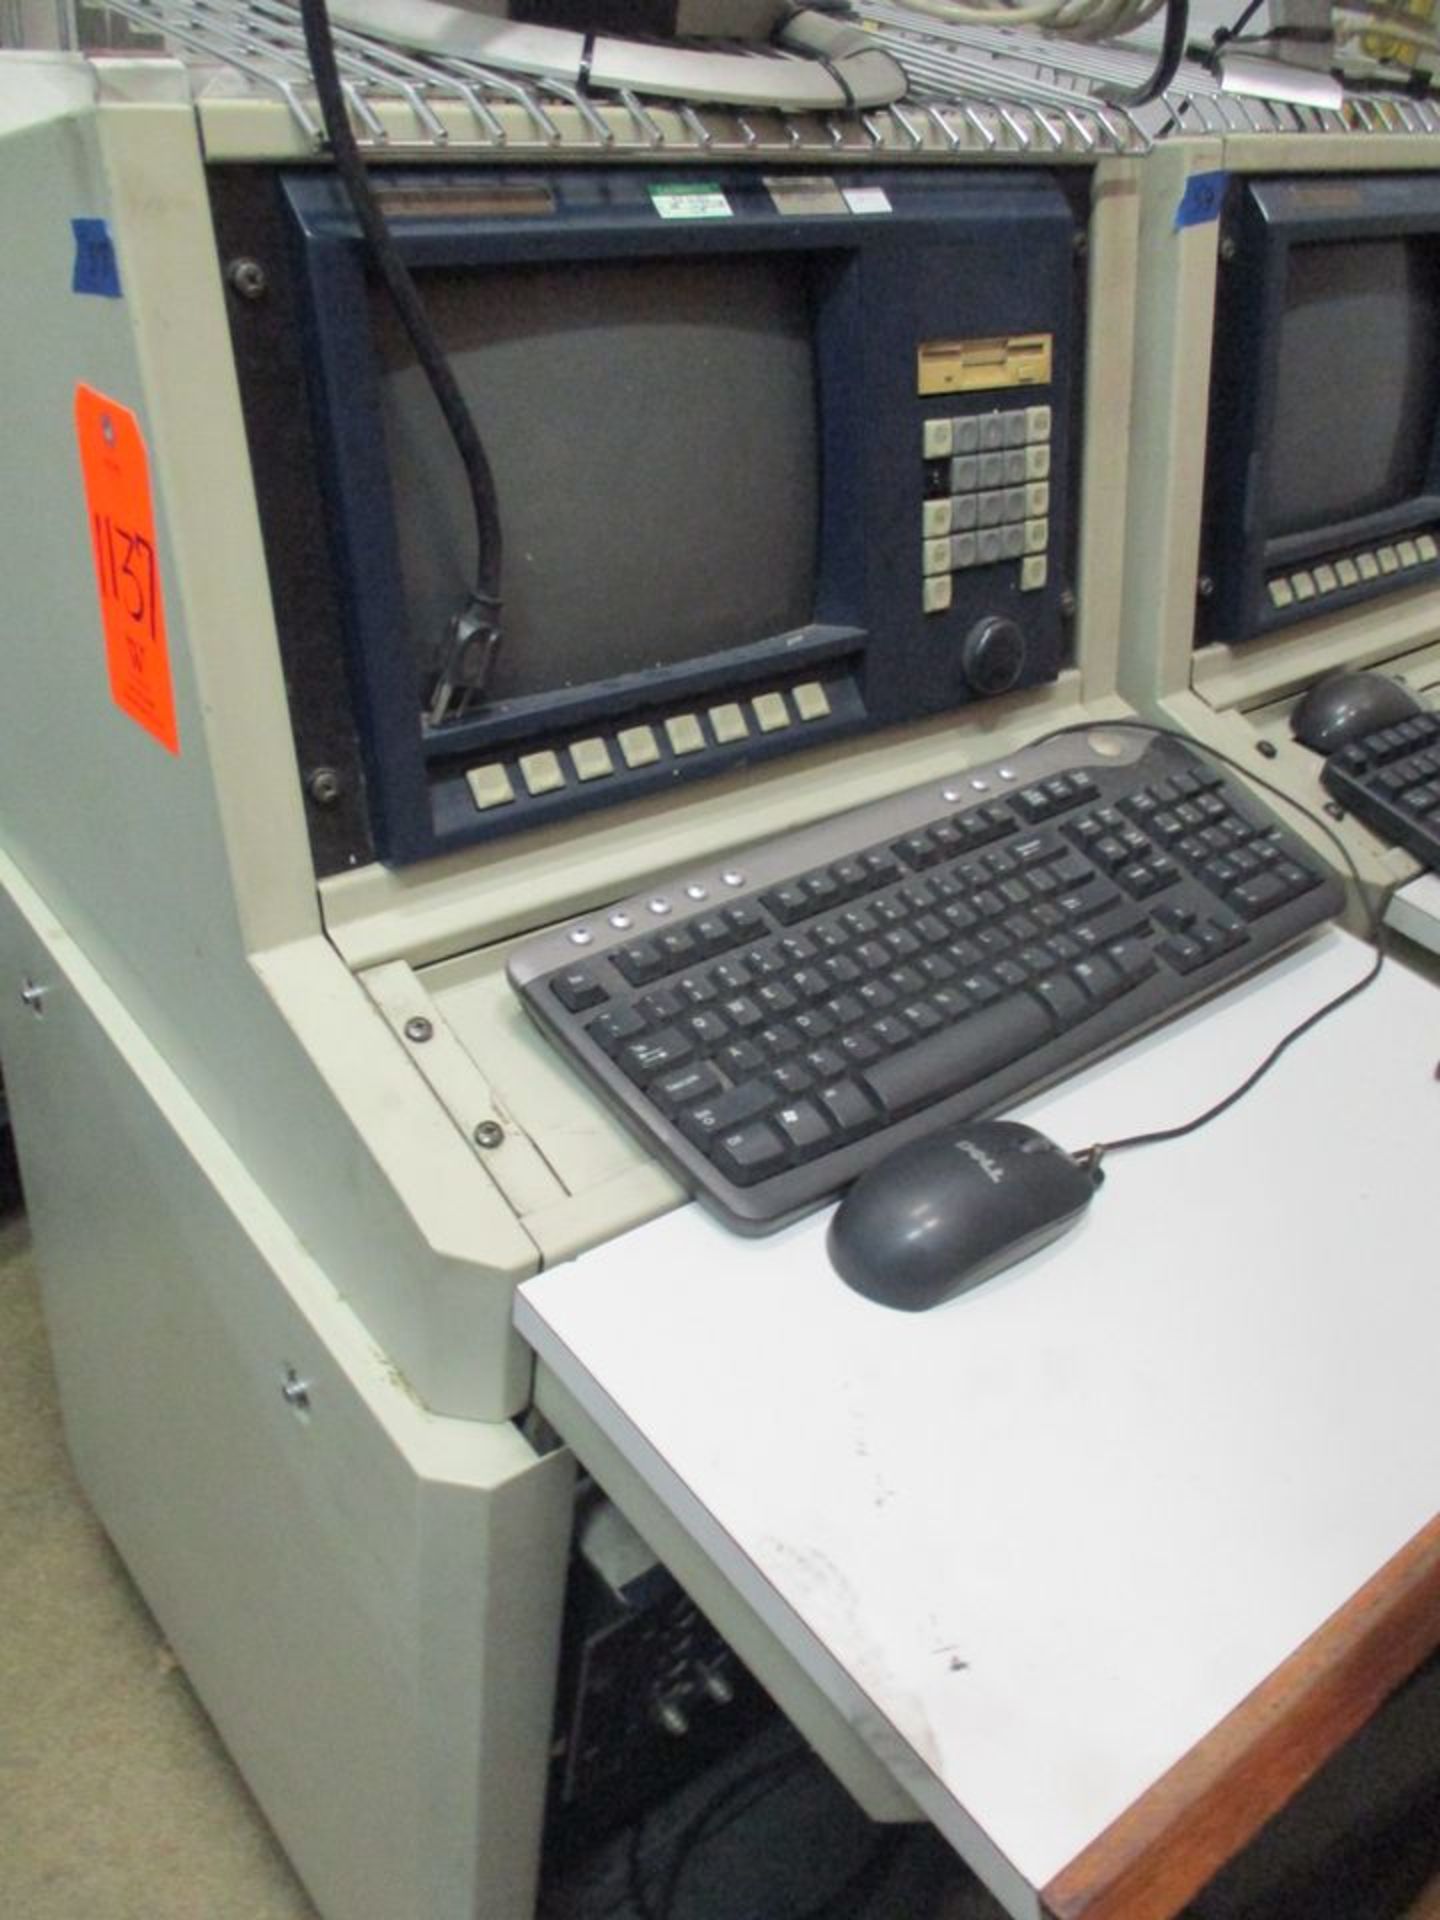 AVL 6707 Indistation Control Console (Dept 509 Instrument Room)